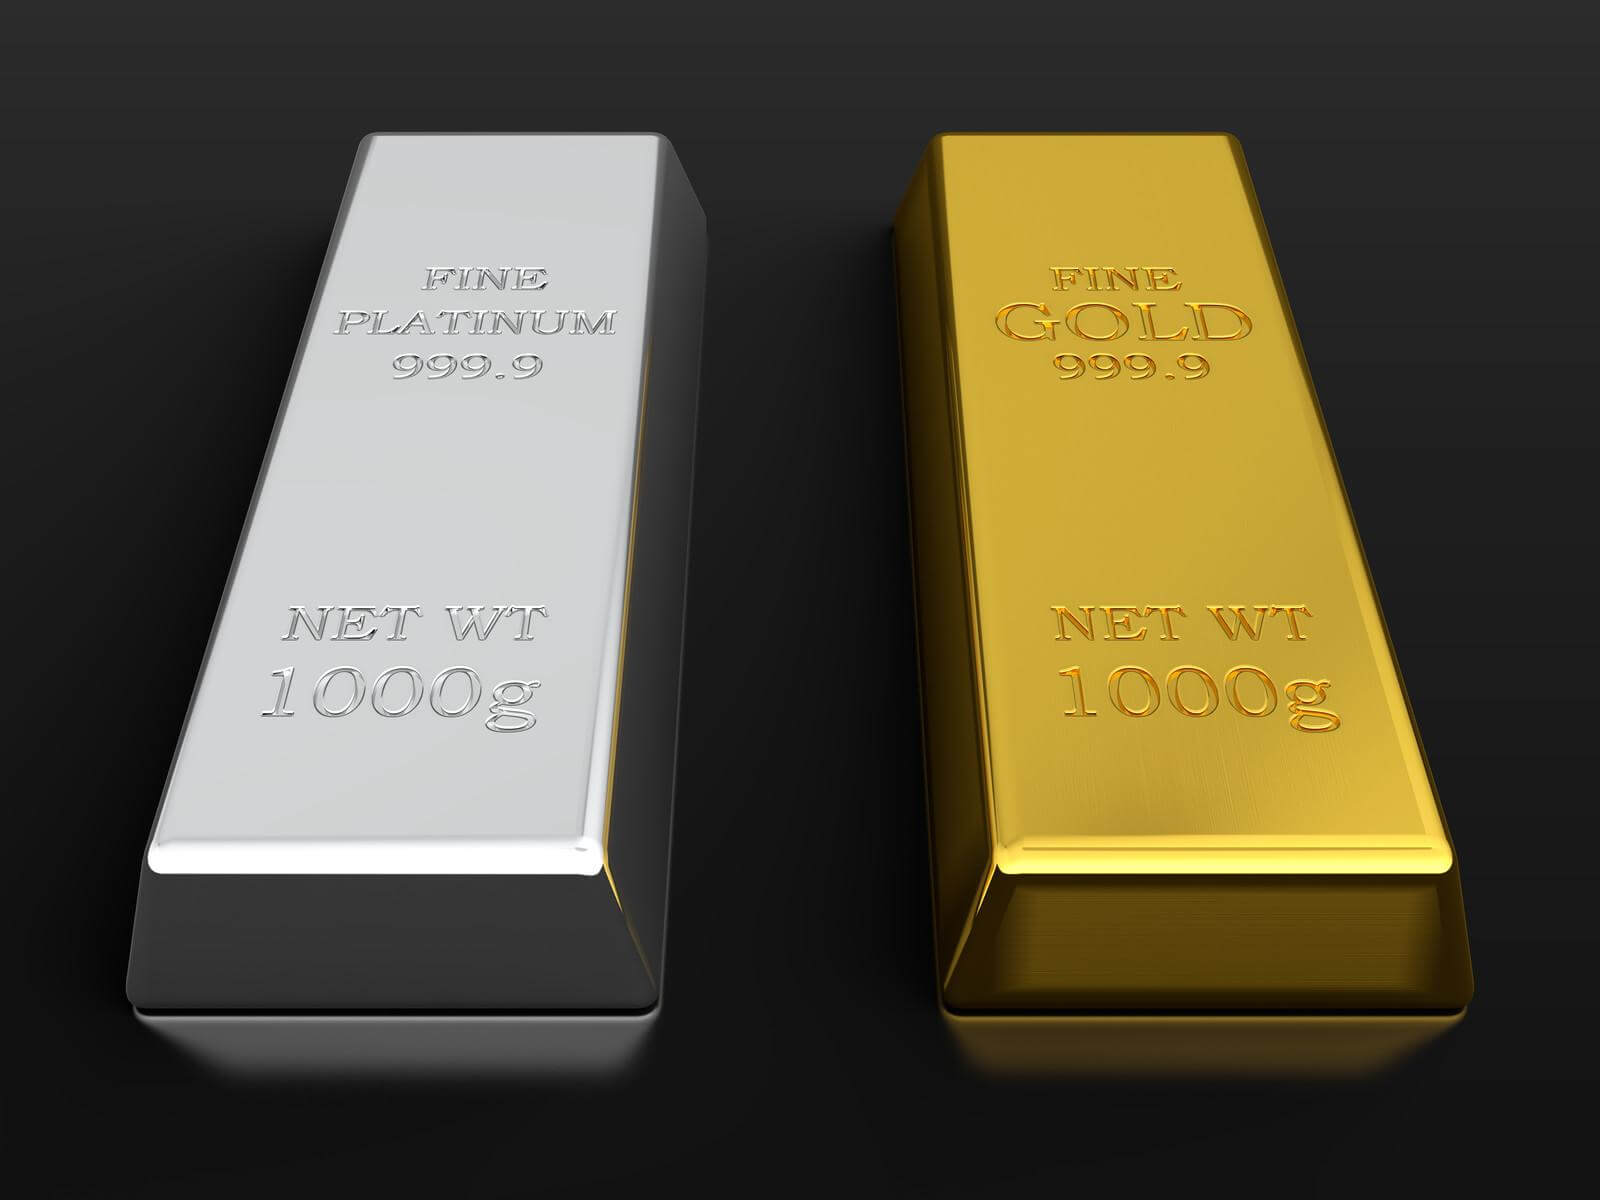 Platinum vs. Gold - Which Is The Better Long-Term Investment?